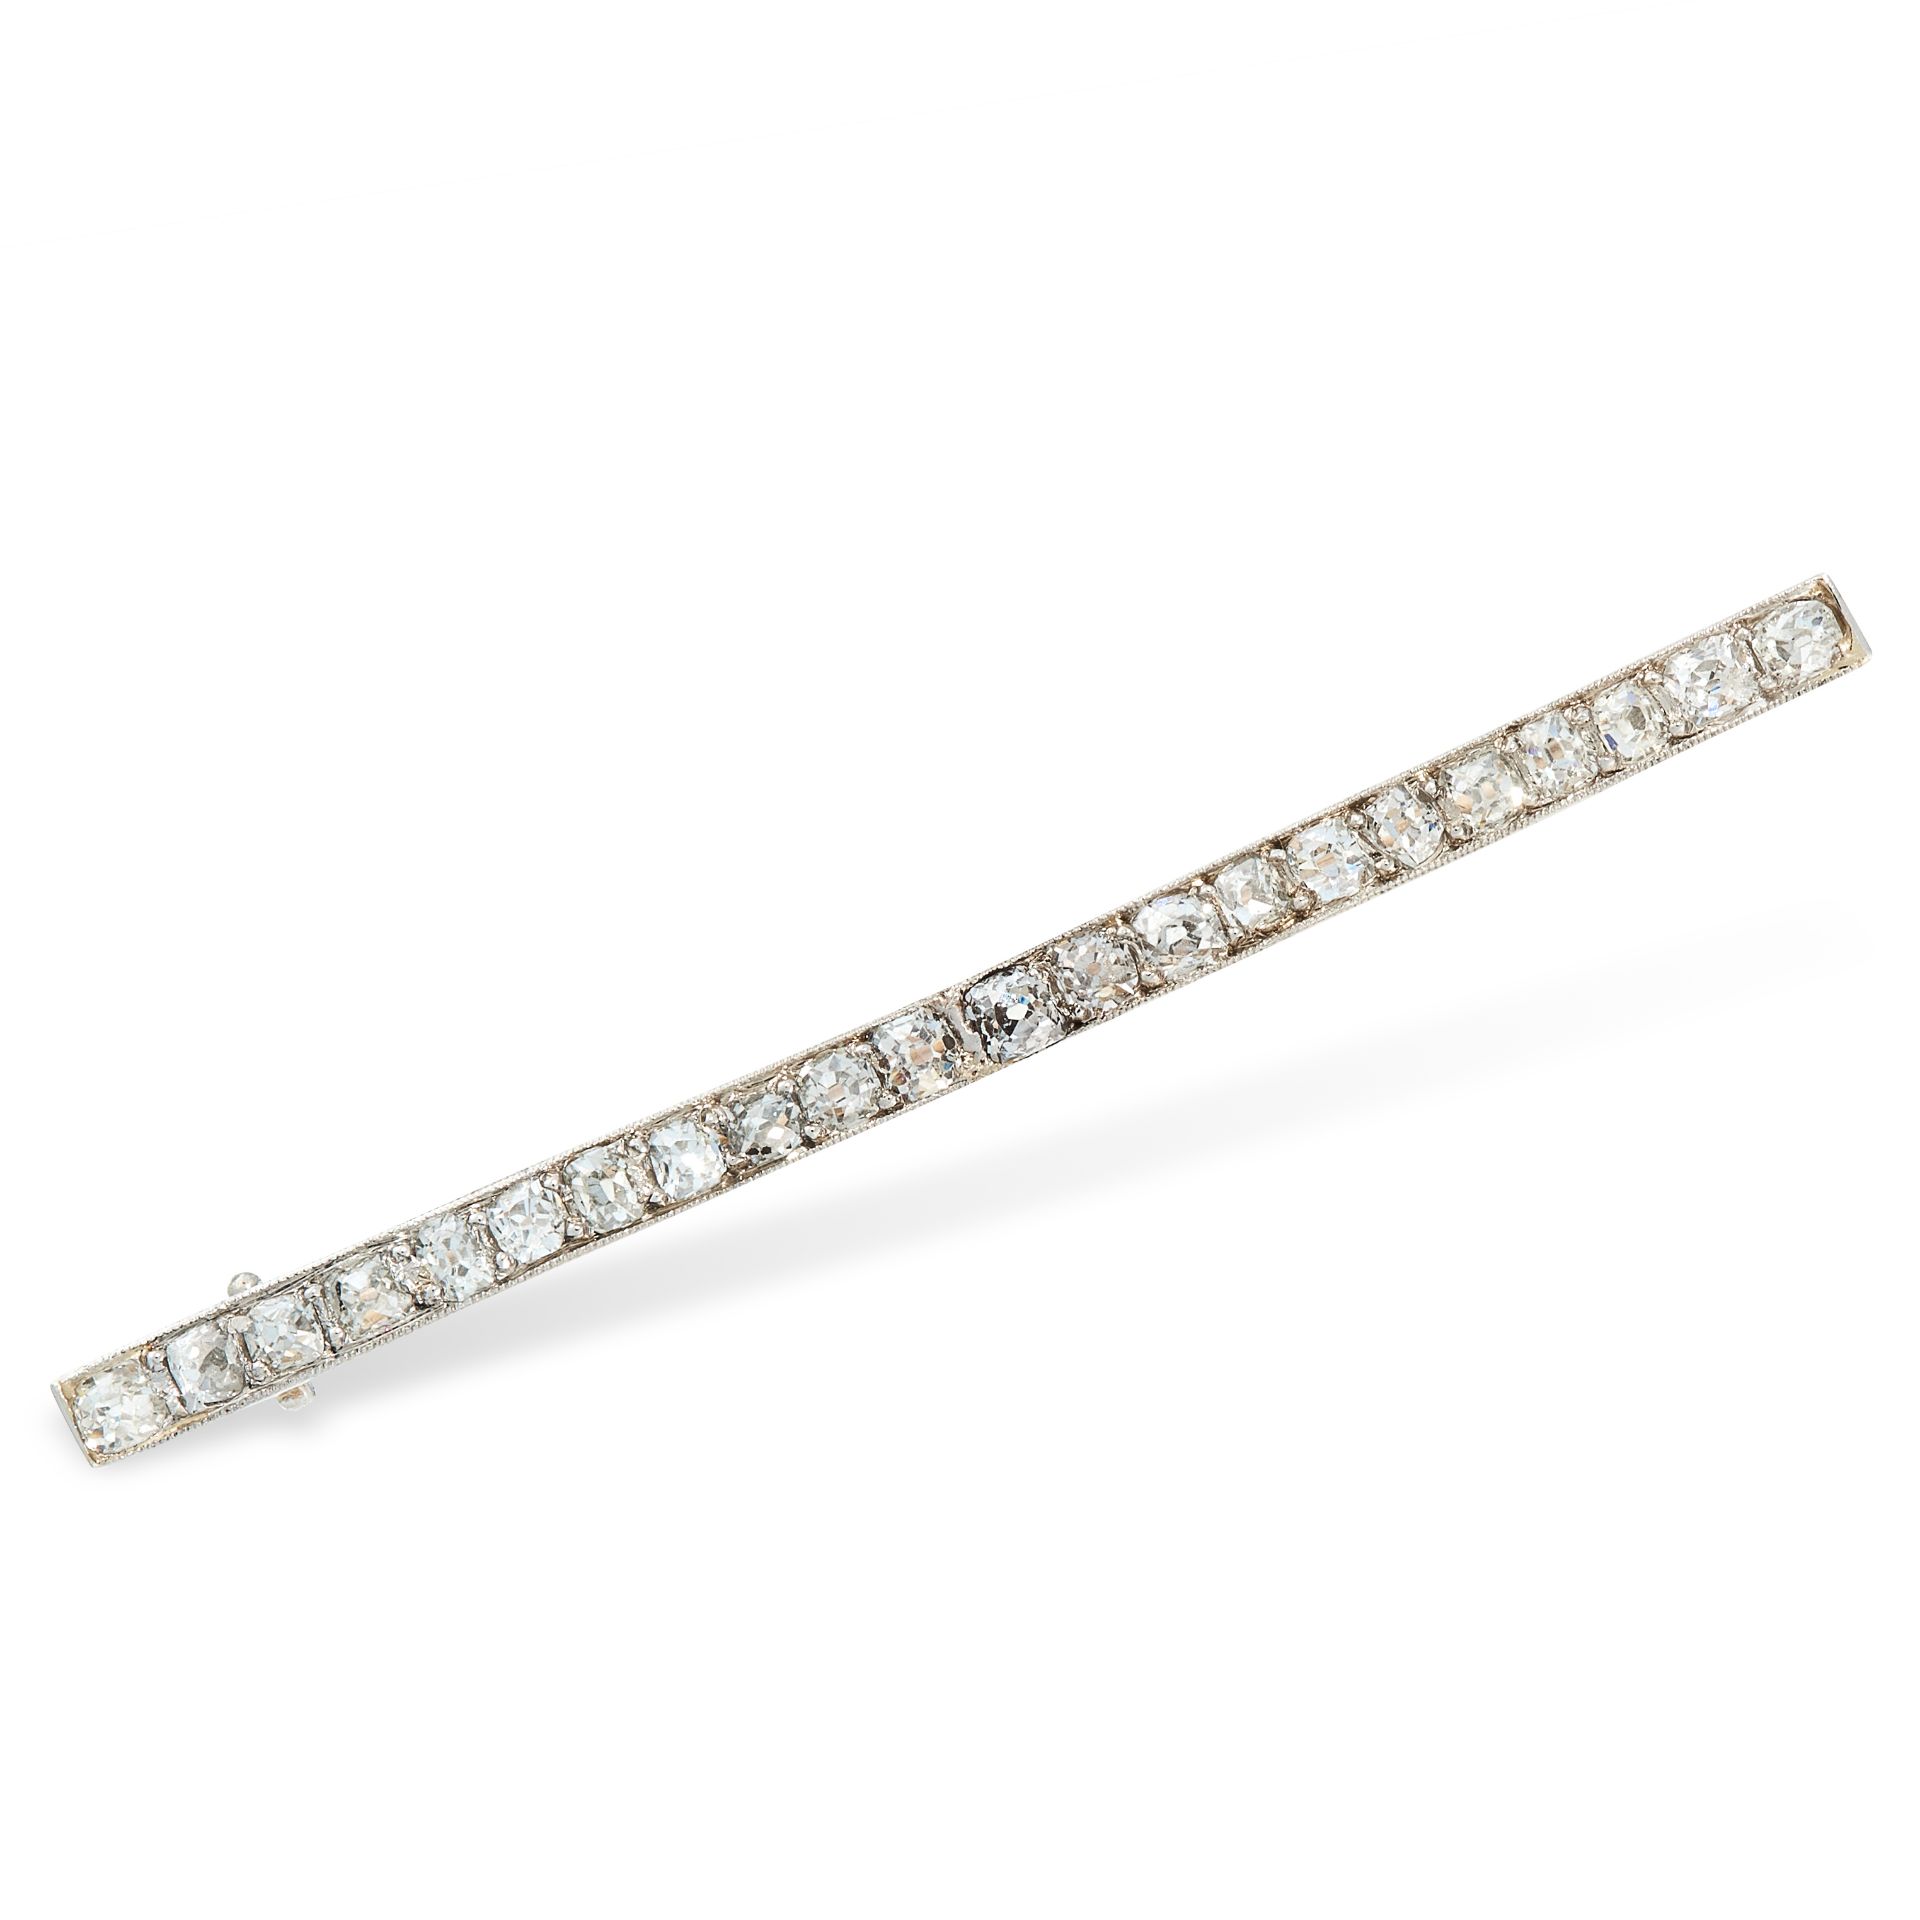 AN ART DECO DIAMOND BAR BROOCH, CIRCA 1920 in 18ct yellow gold and platinum, set with a single row